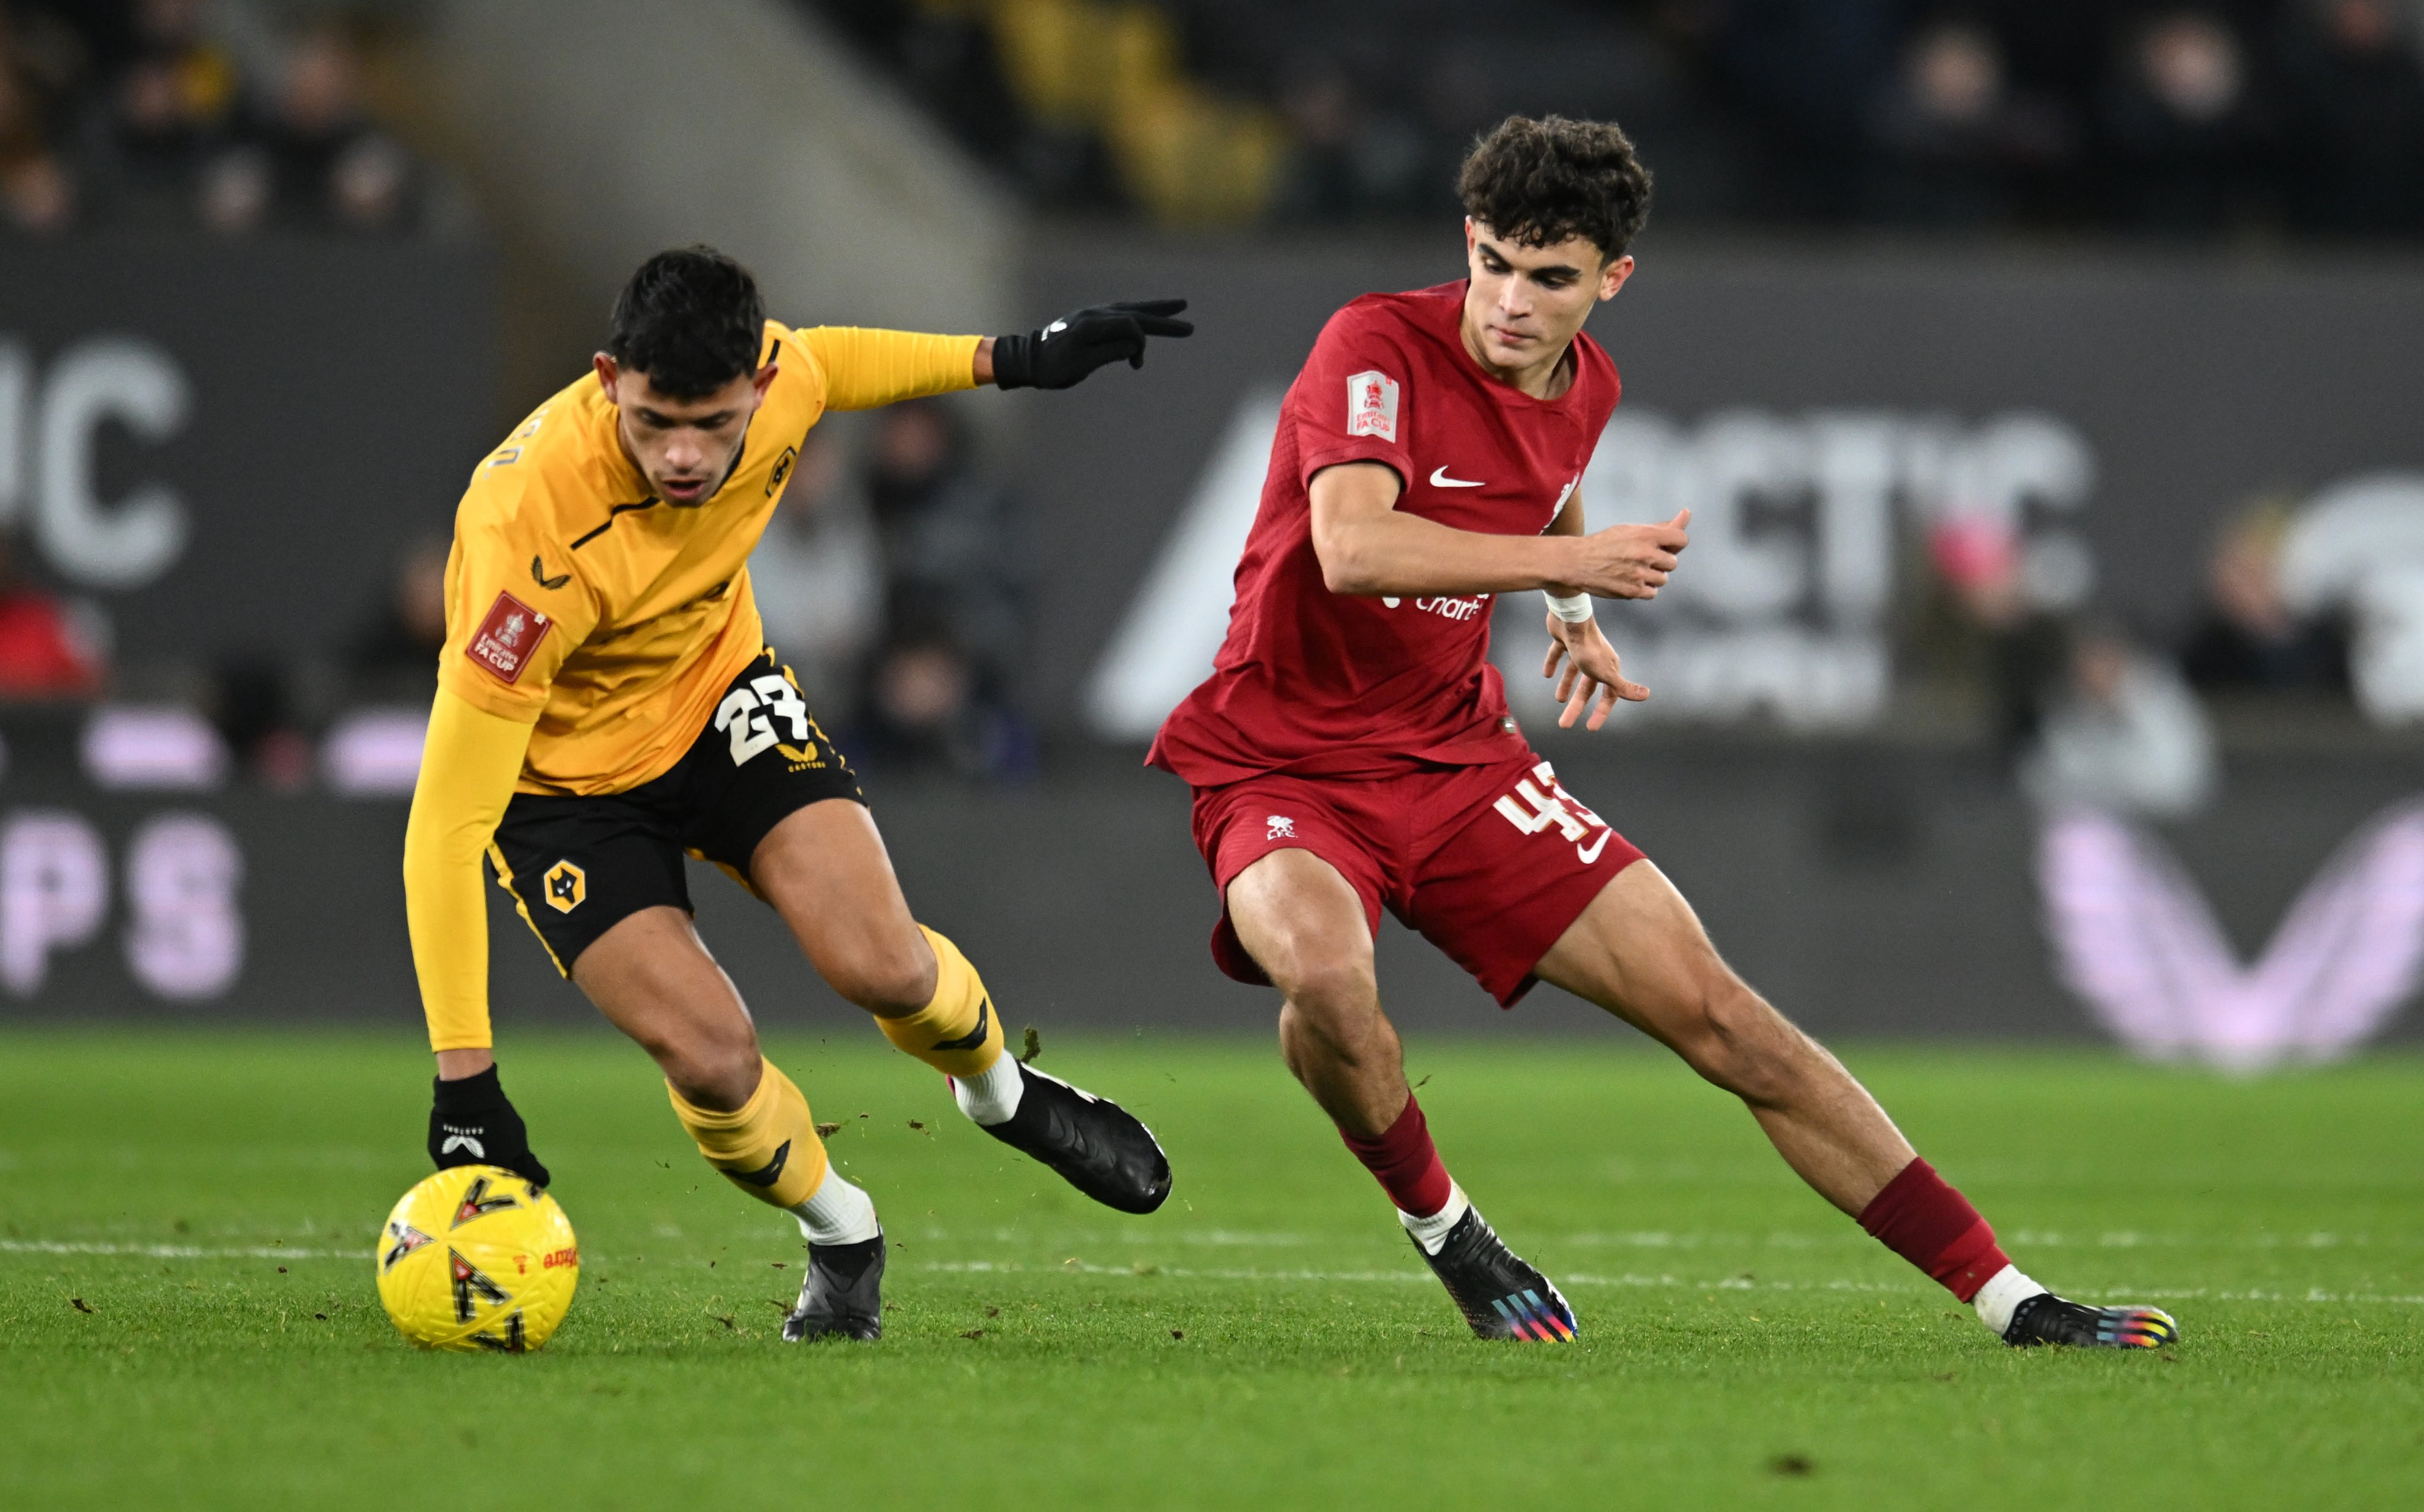 Wolves vs Liverpool Highlights, FA CupHighlights, WOL vs LIV Highlights, Liverpool, Wolverhampton, Wolves vs Liverpool, FA Cup Fourth Round, Harvey Elliot